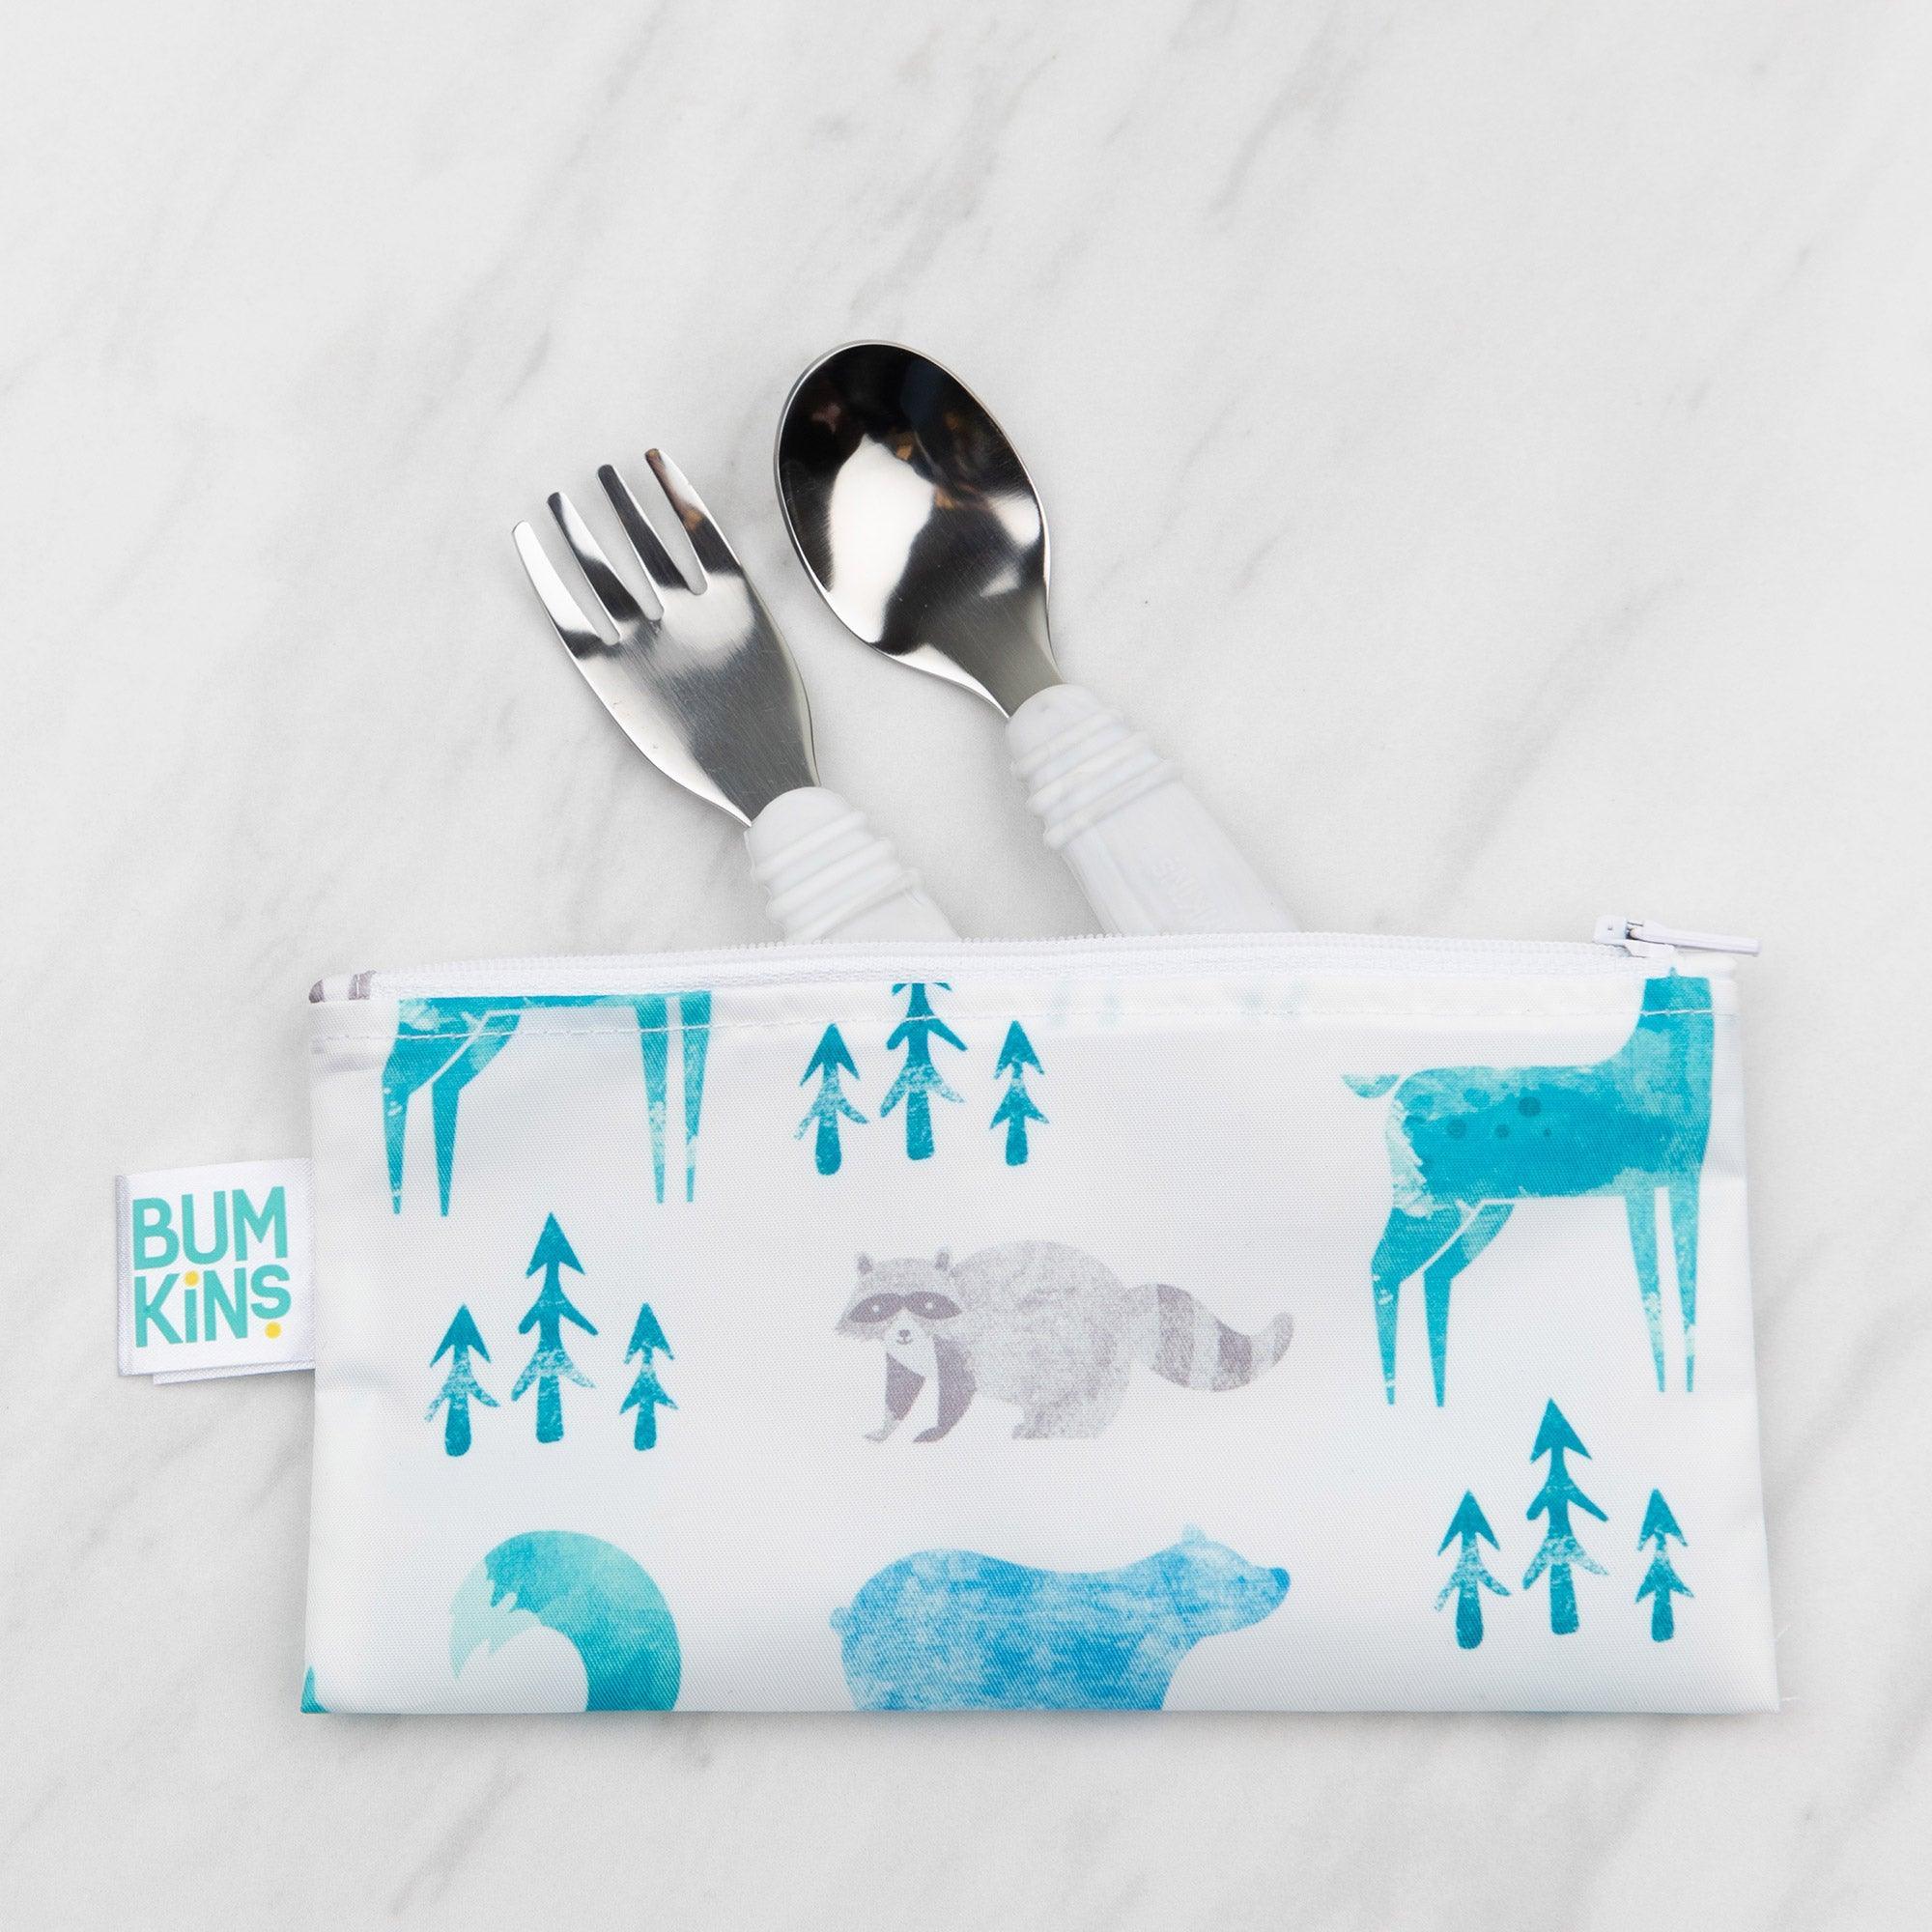 Reusable Snack Bag, Small 2-Pack: Outdoors & Wildlife - Bumkins